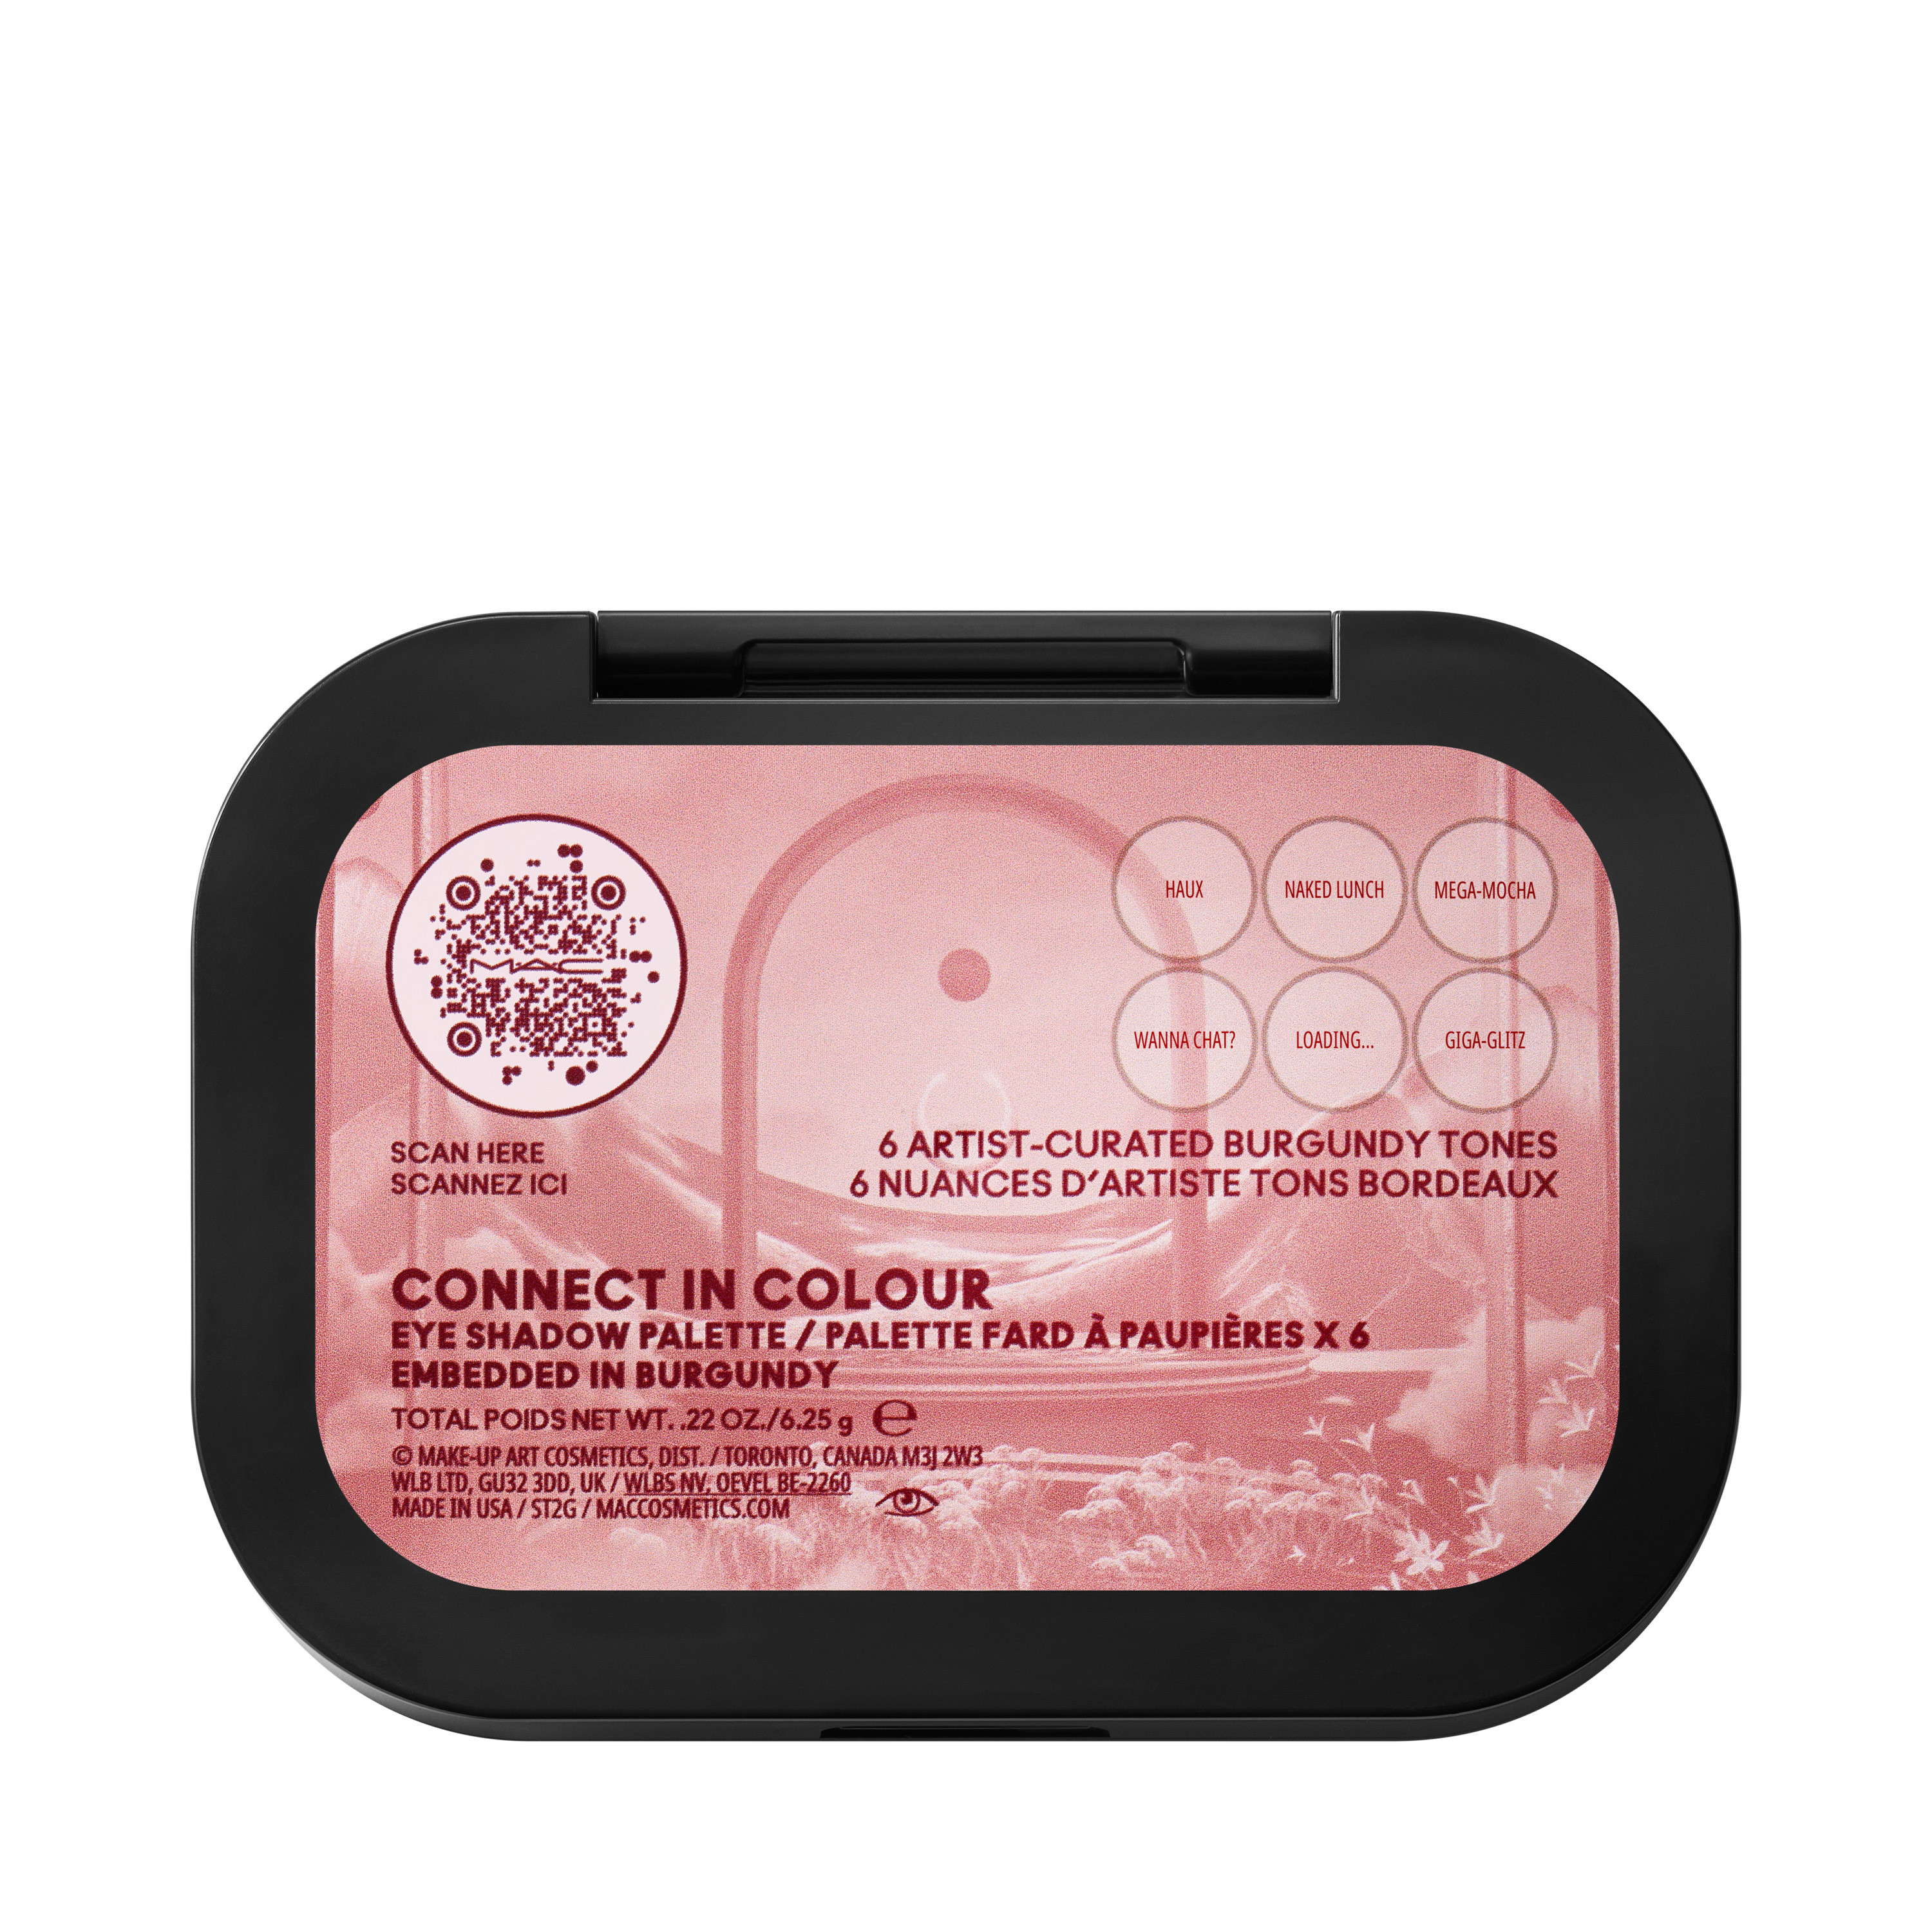 Connect in colour eye palette x6 - Embedded In Burgundy, Rosa scuro, large image number 2